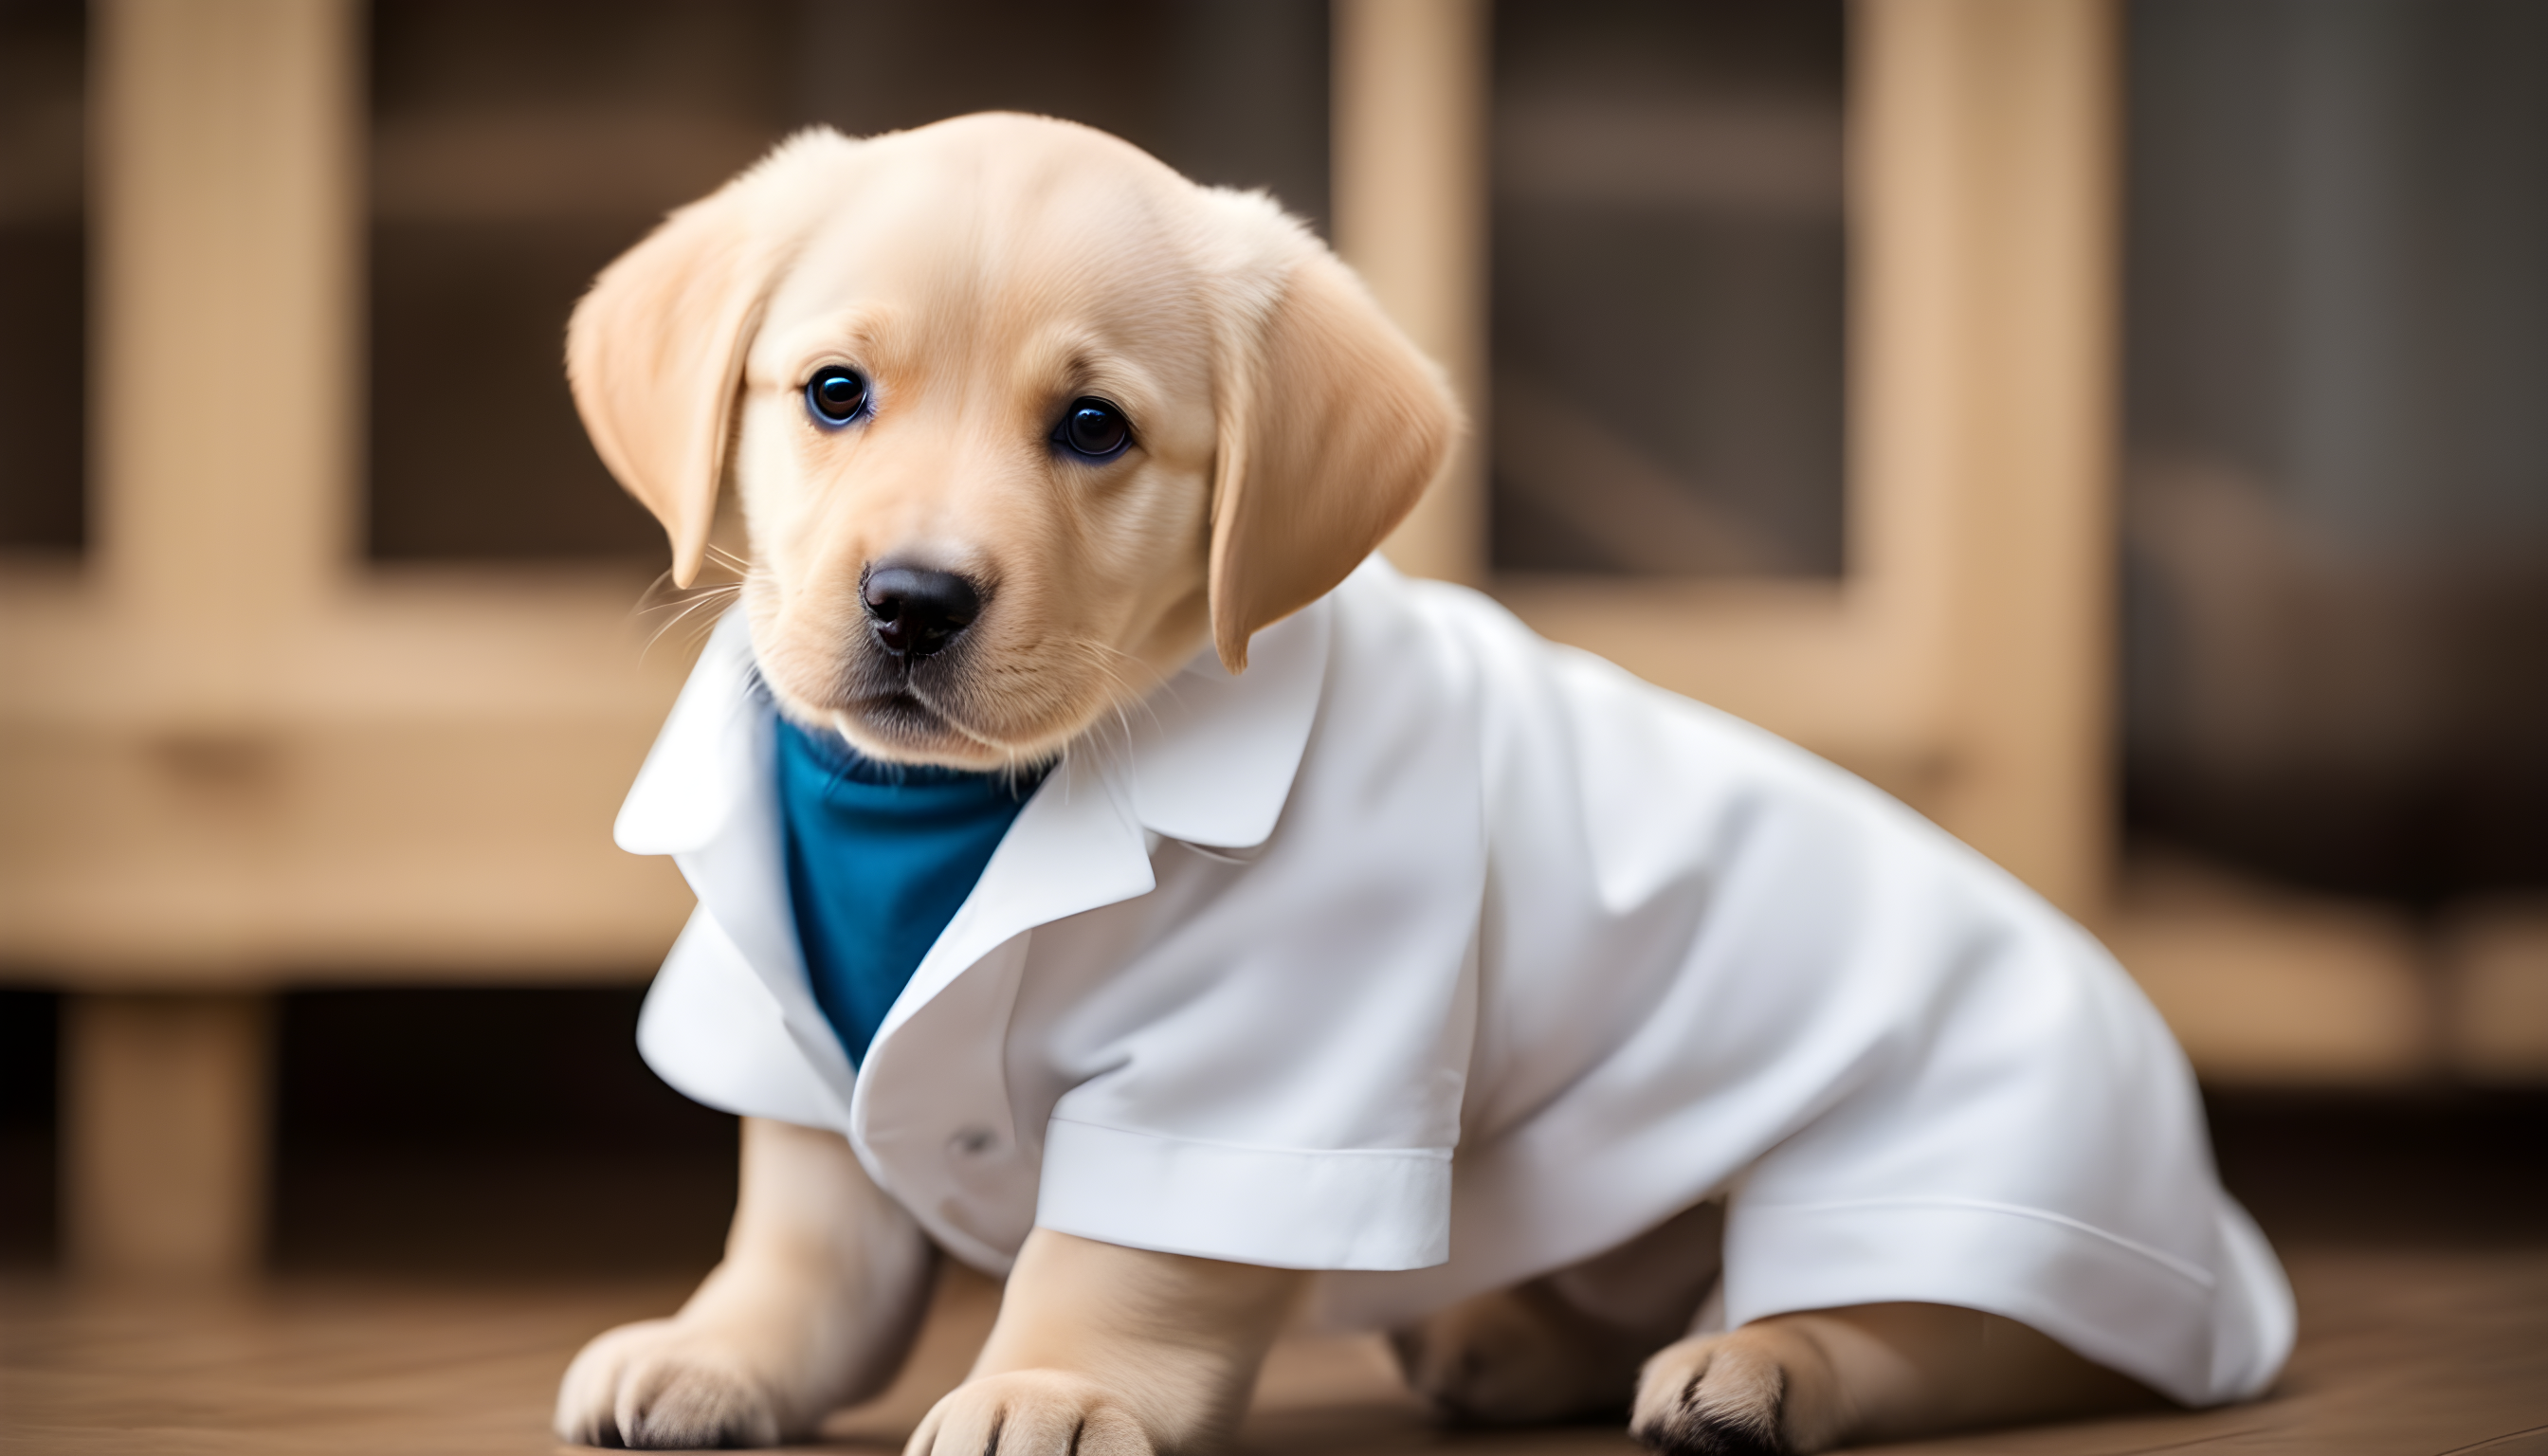 An adorable British Lab puppy wearing a lab coat, because, well, it's a Lab in a lab coat!